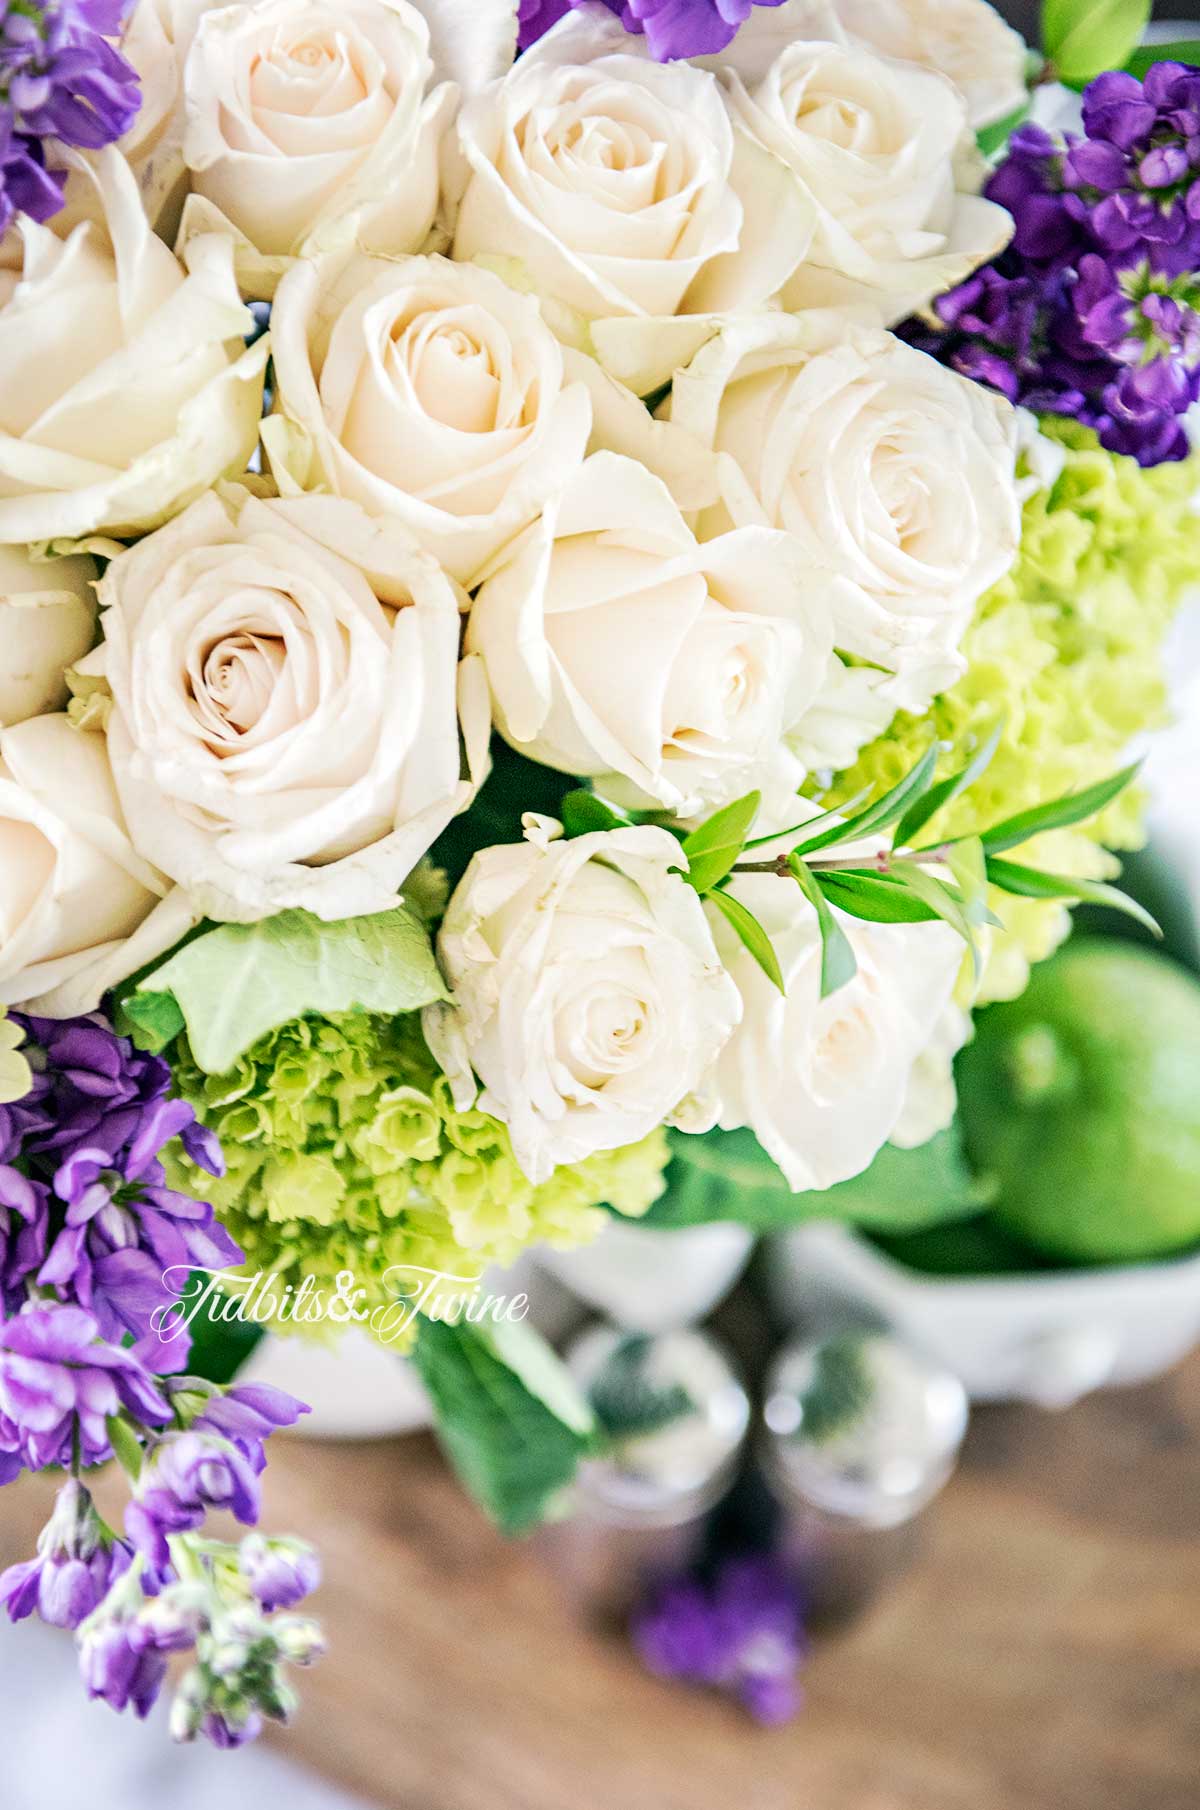 looking from above white roses with purple stock and green hydrangea with limes in an ironstone bowl beneath